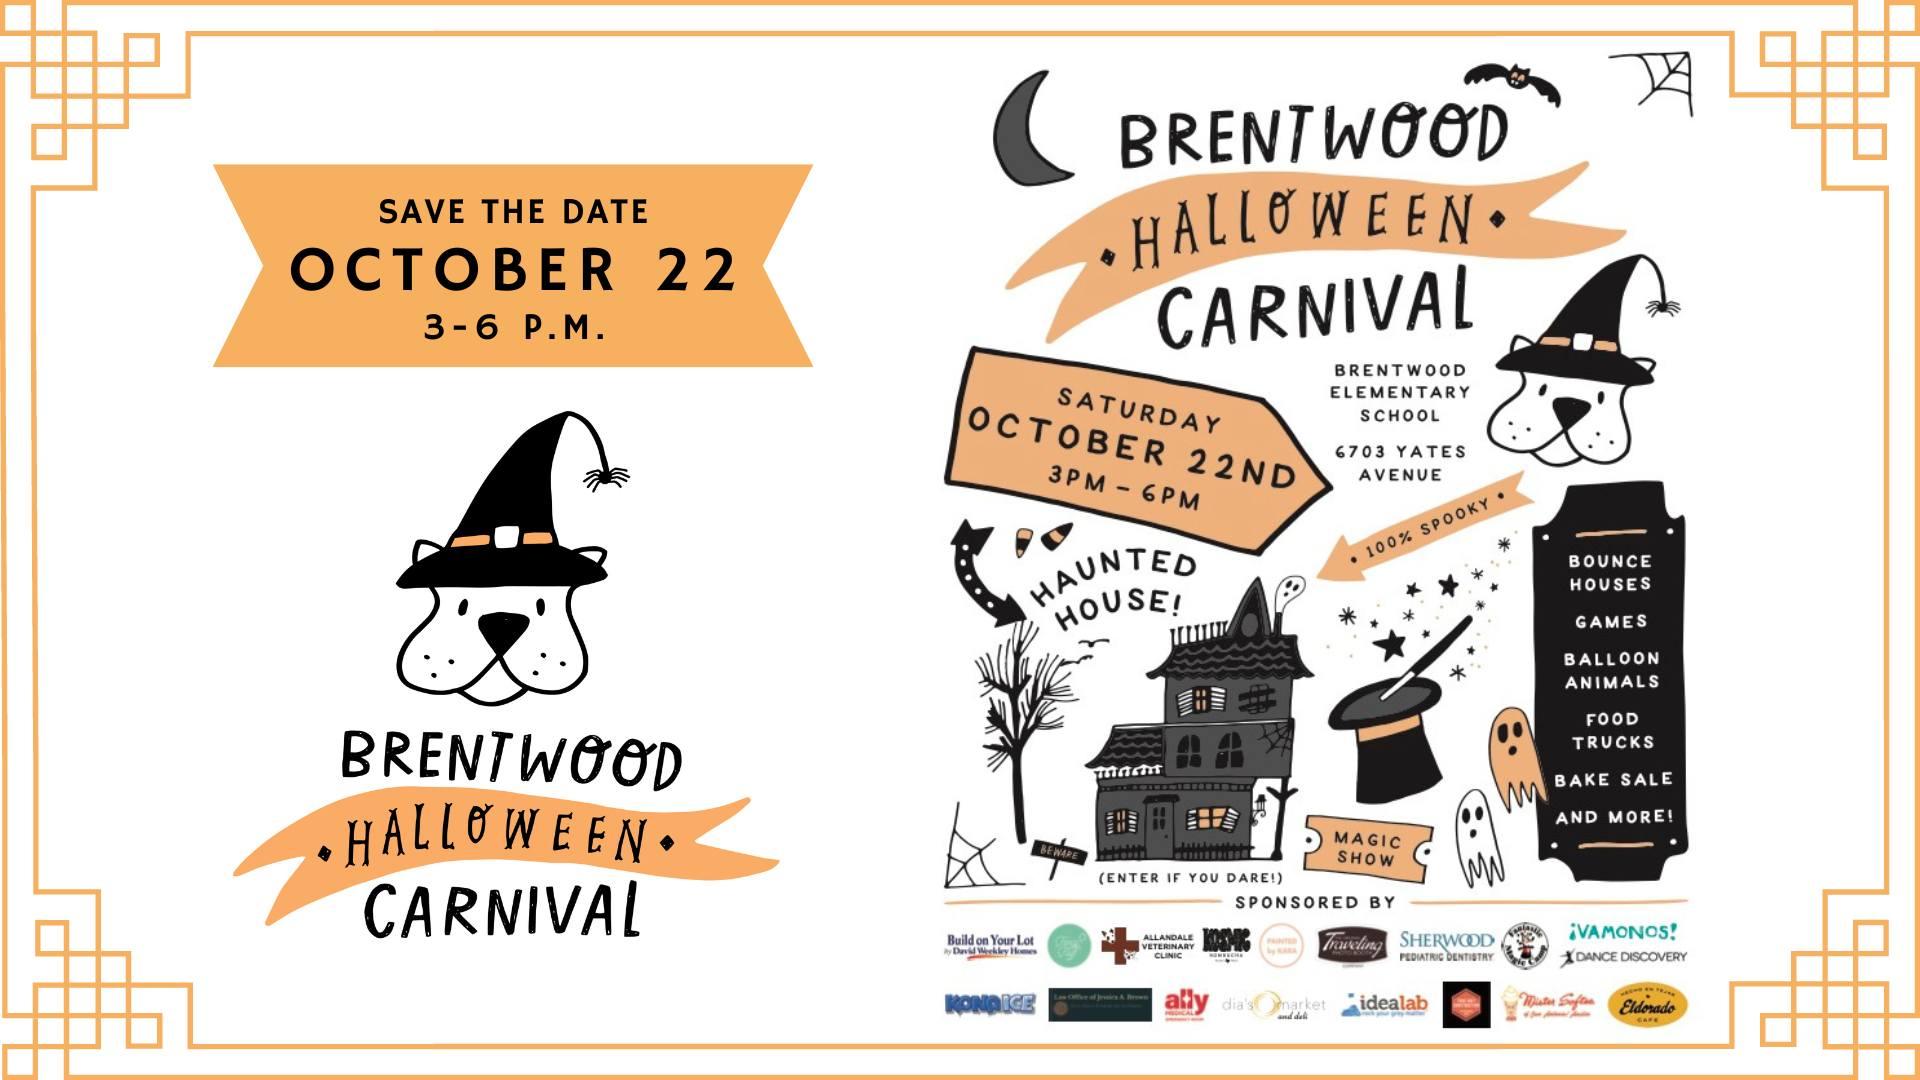 Halloween Carnival
Sat Oct 22, 3:00 PM - Sat Oct 22, 6:00 PM
in 2 days